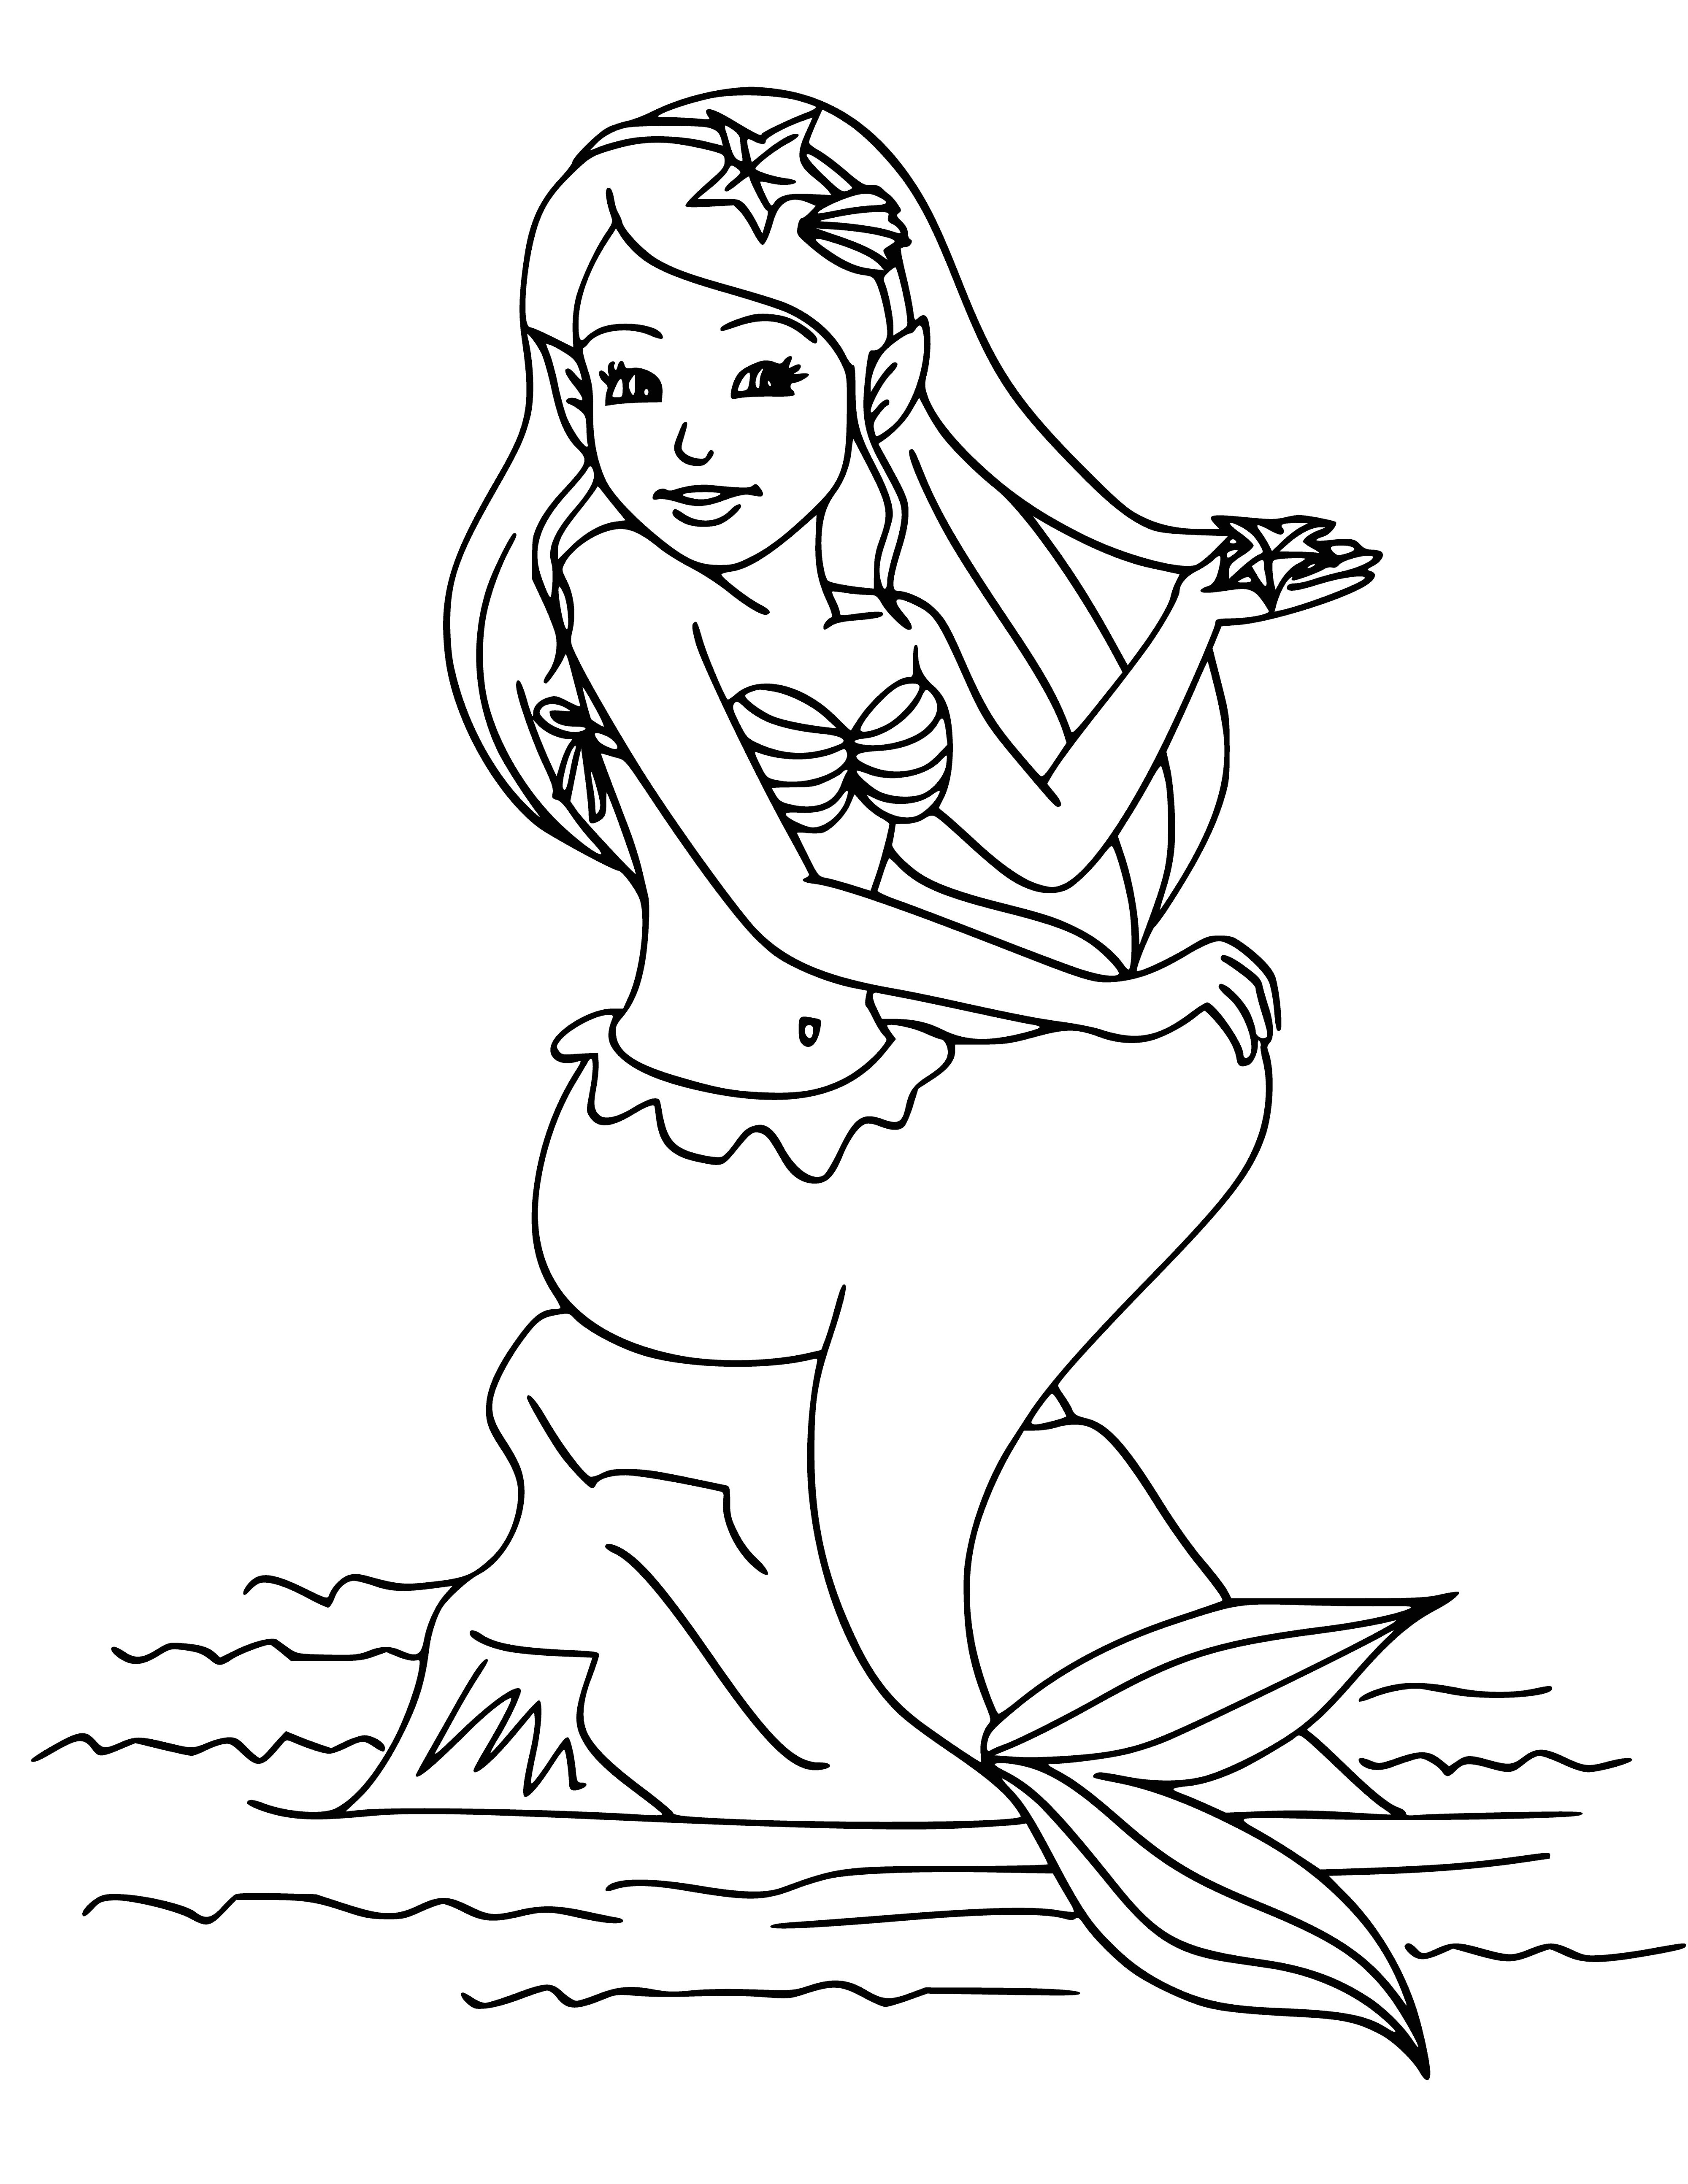 coloring page: Mermaids are human-fish hybrids seen as kind creatures that can grant wishes.